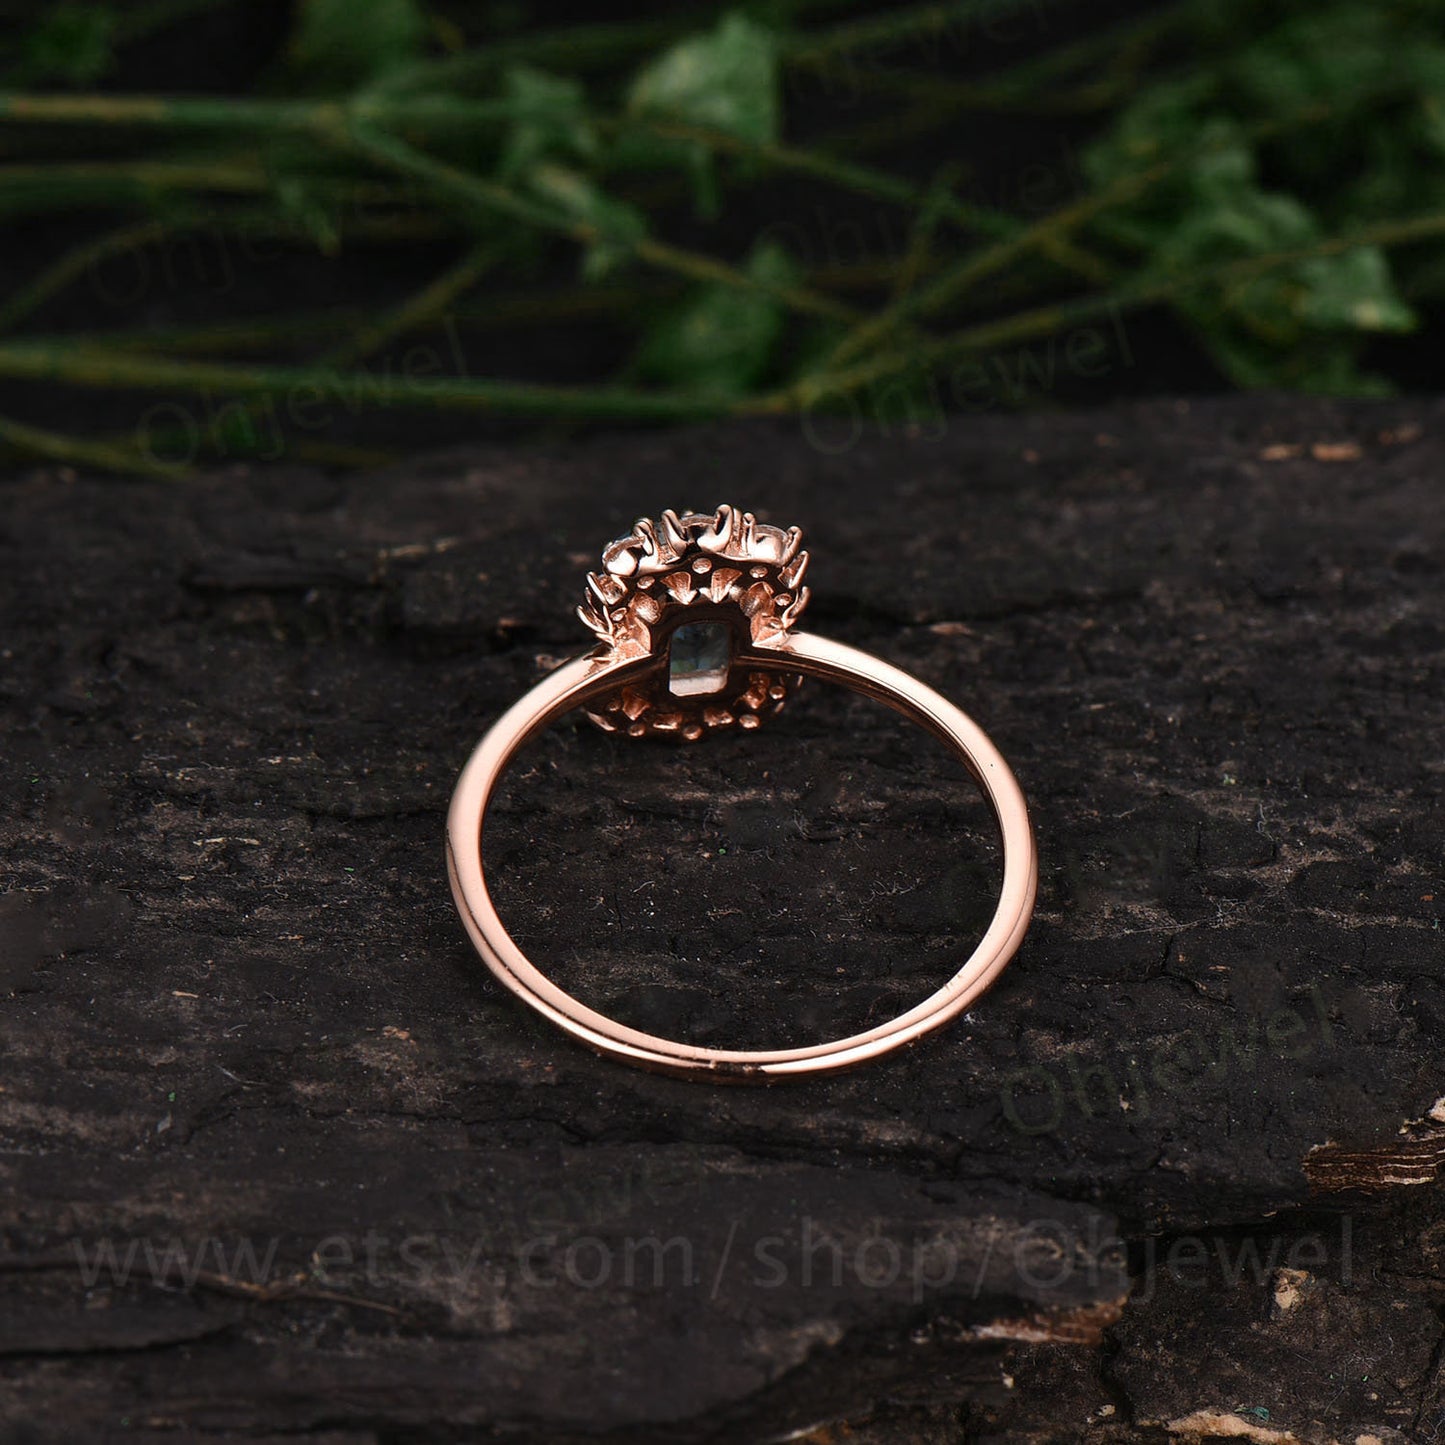 Unique engagement ring vintage moss agate engagement ring cluster halo moissanite ring rose gold organic gemstone ring for women jewelry